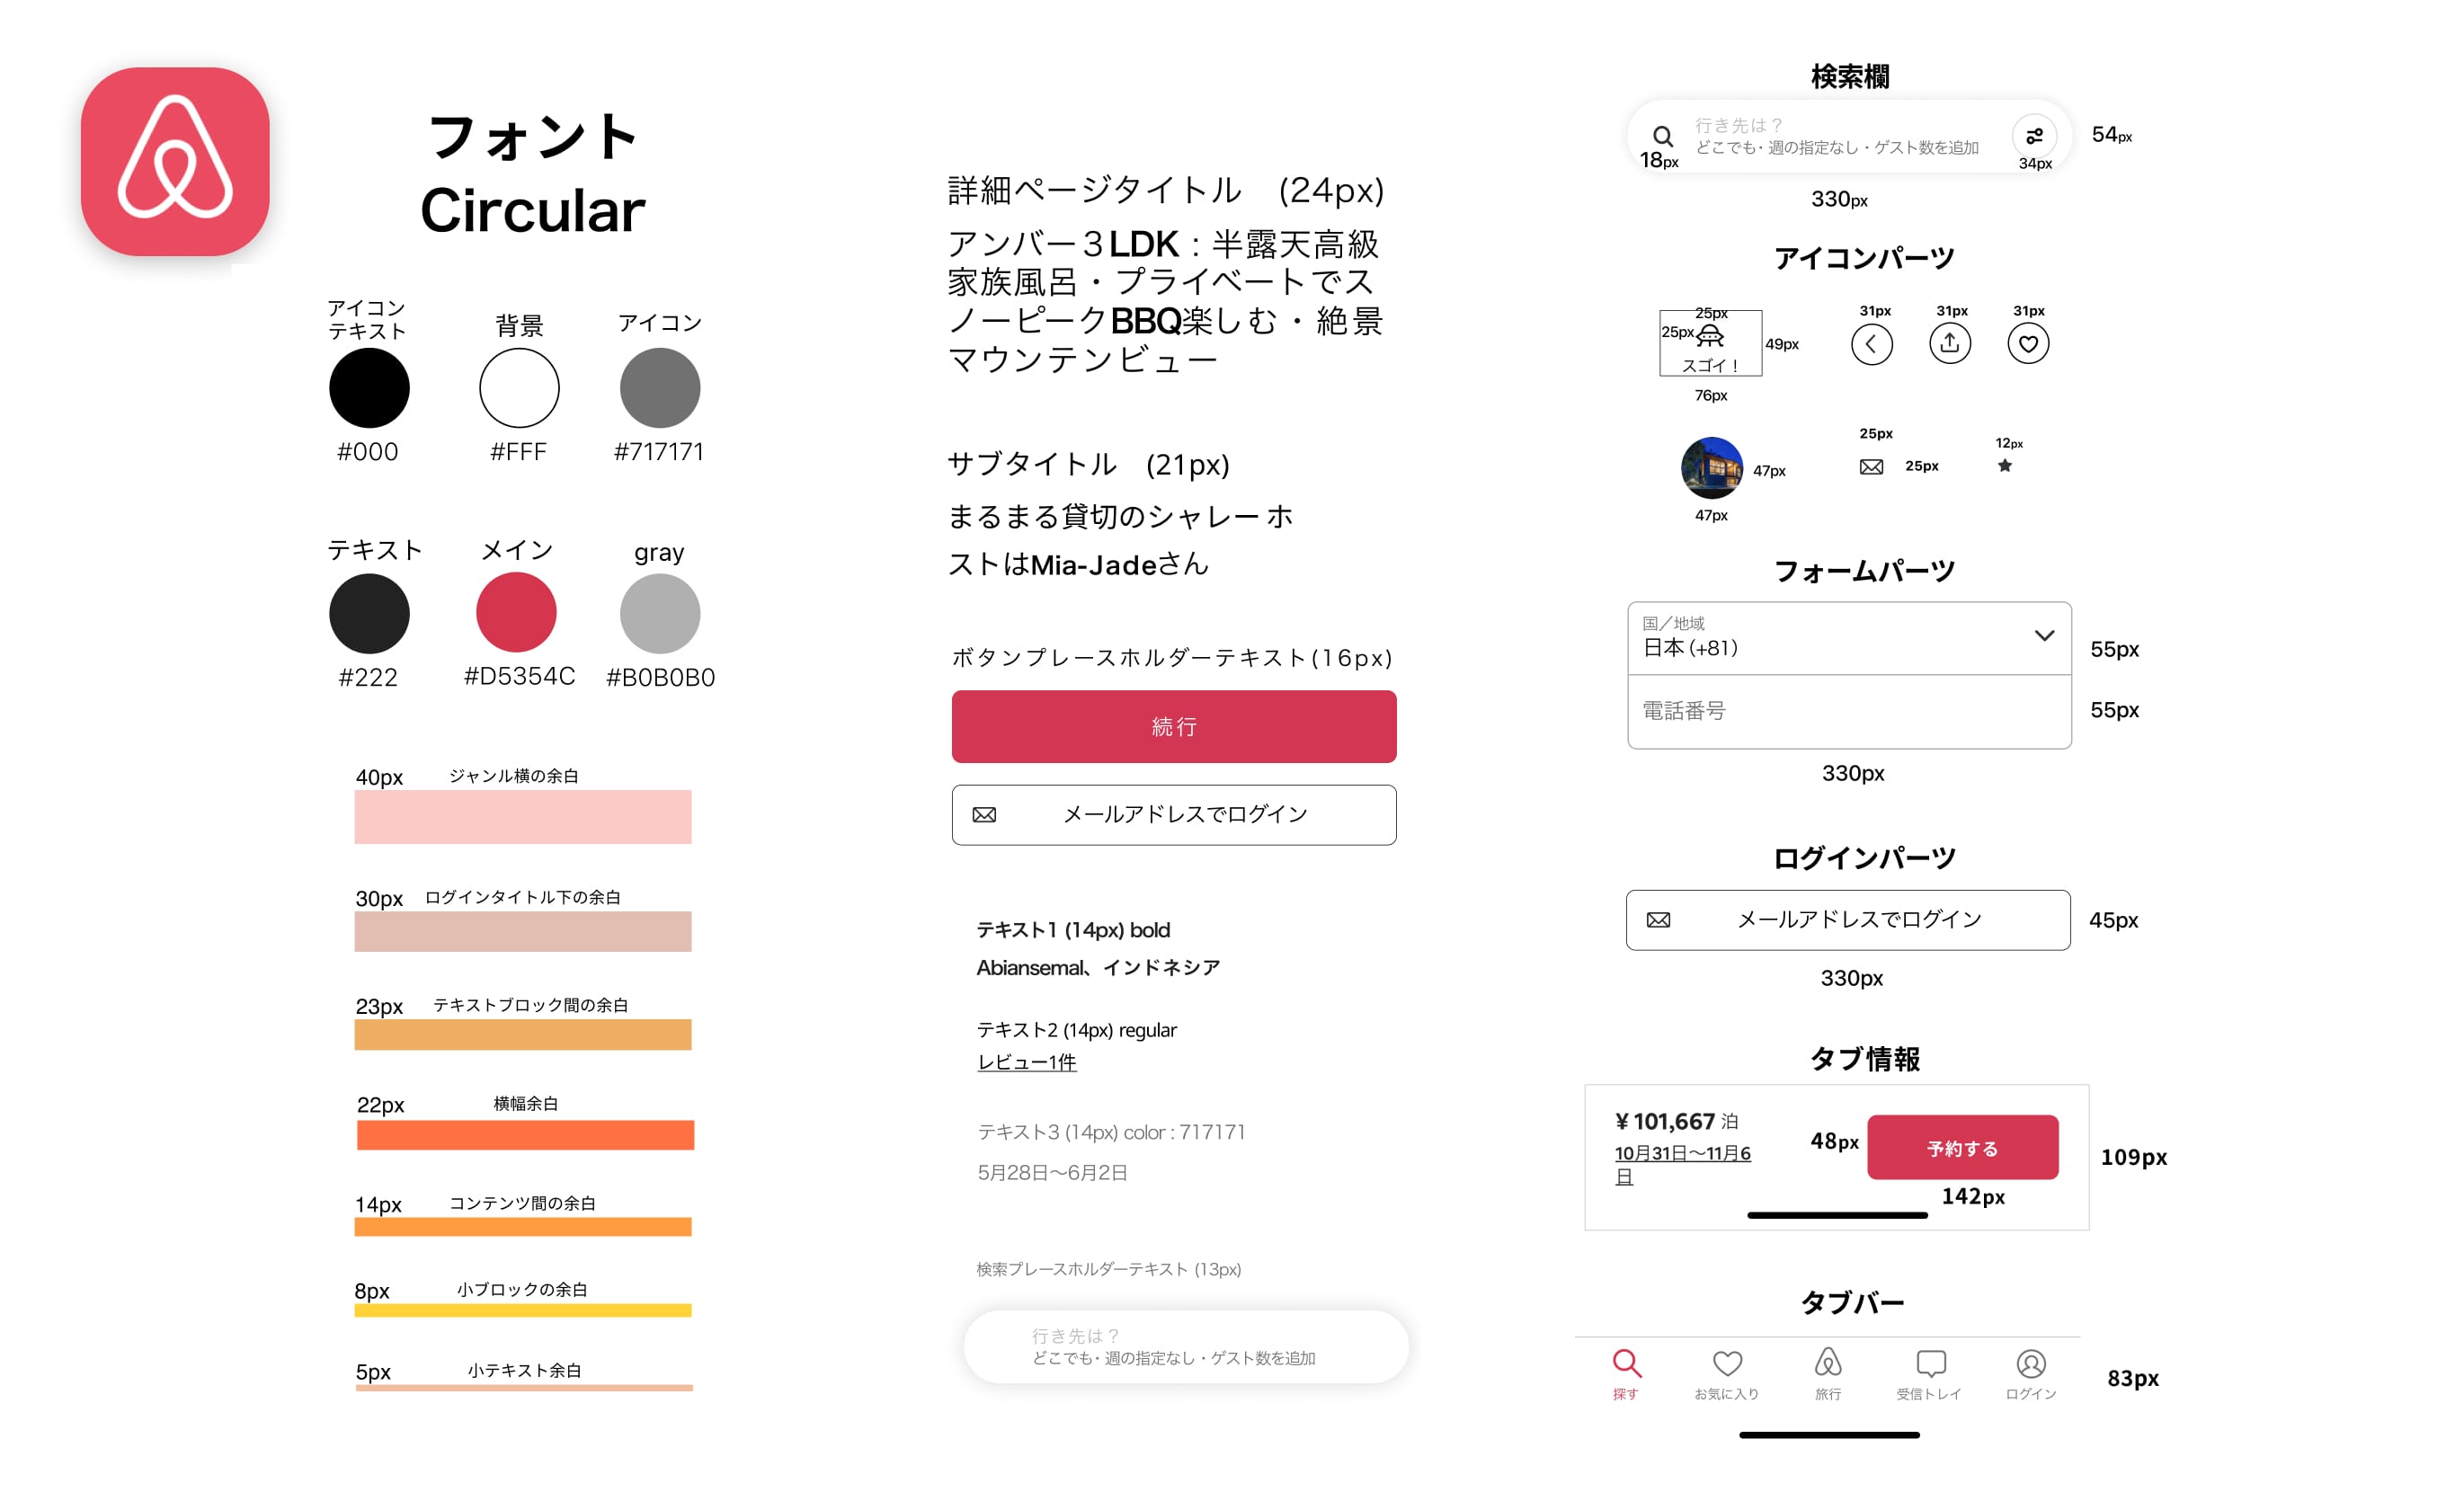 ④Airbnb